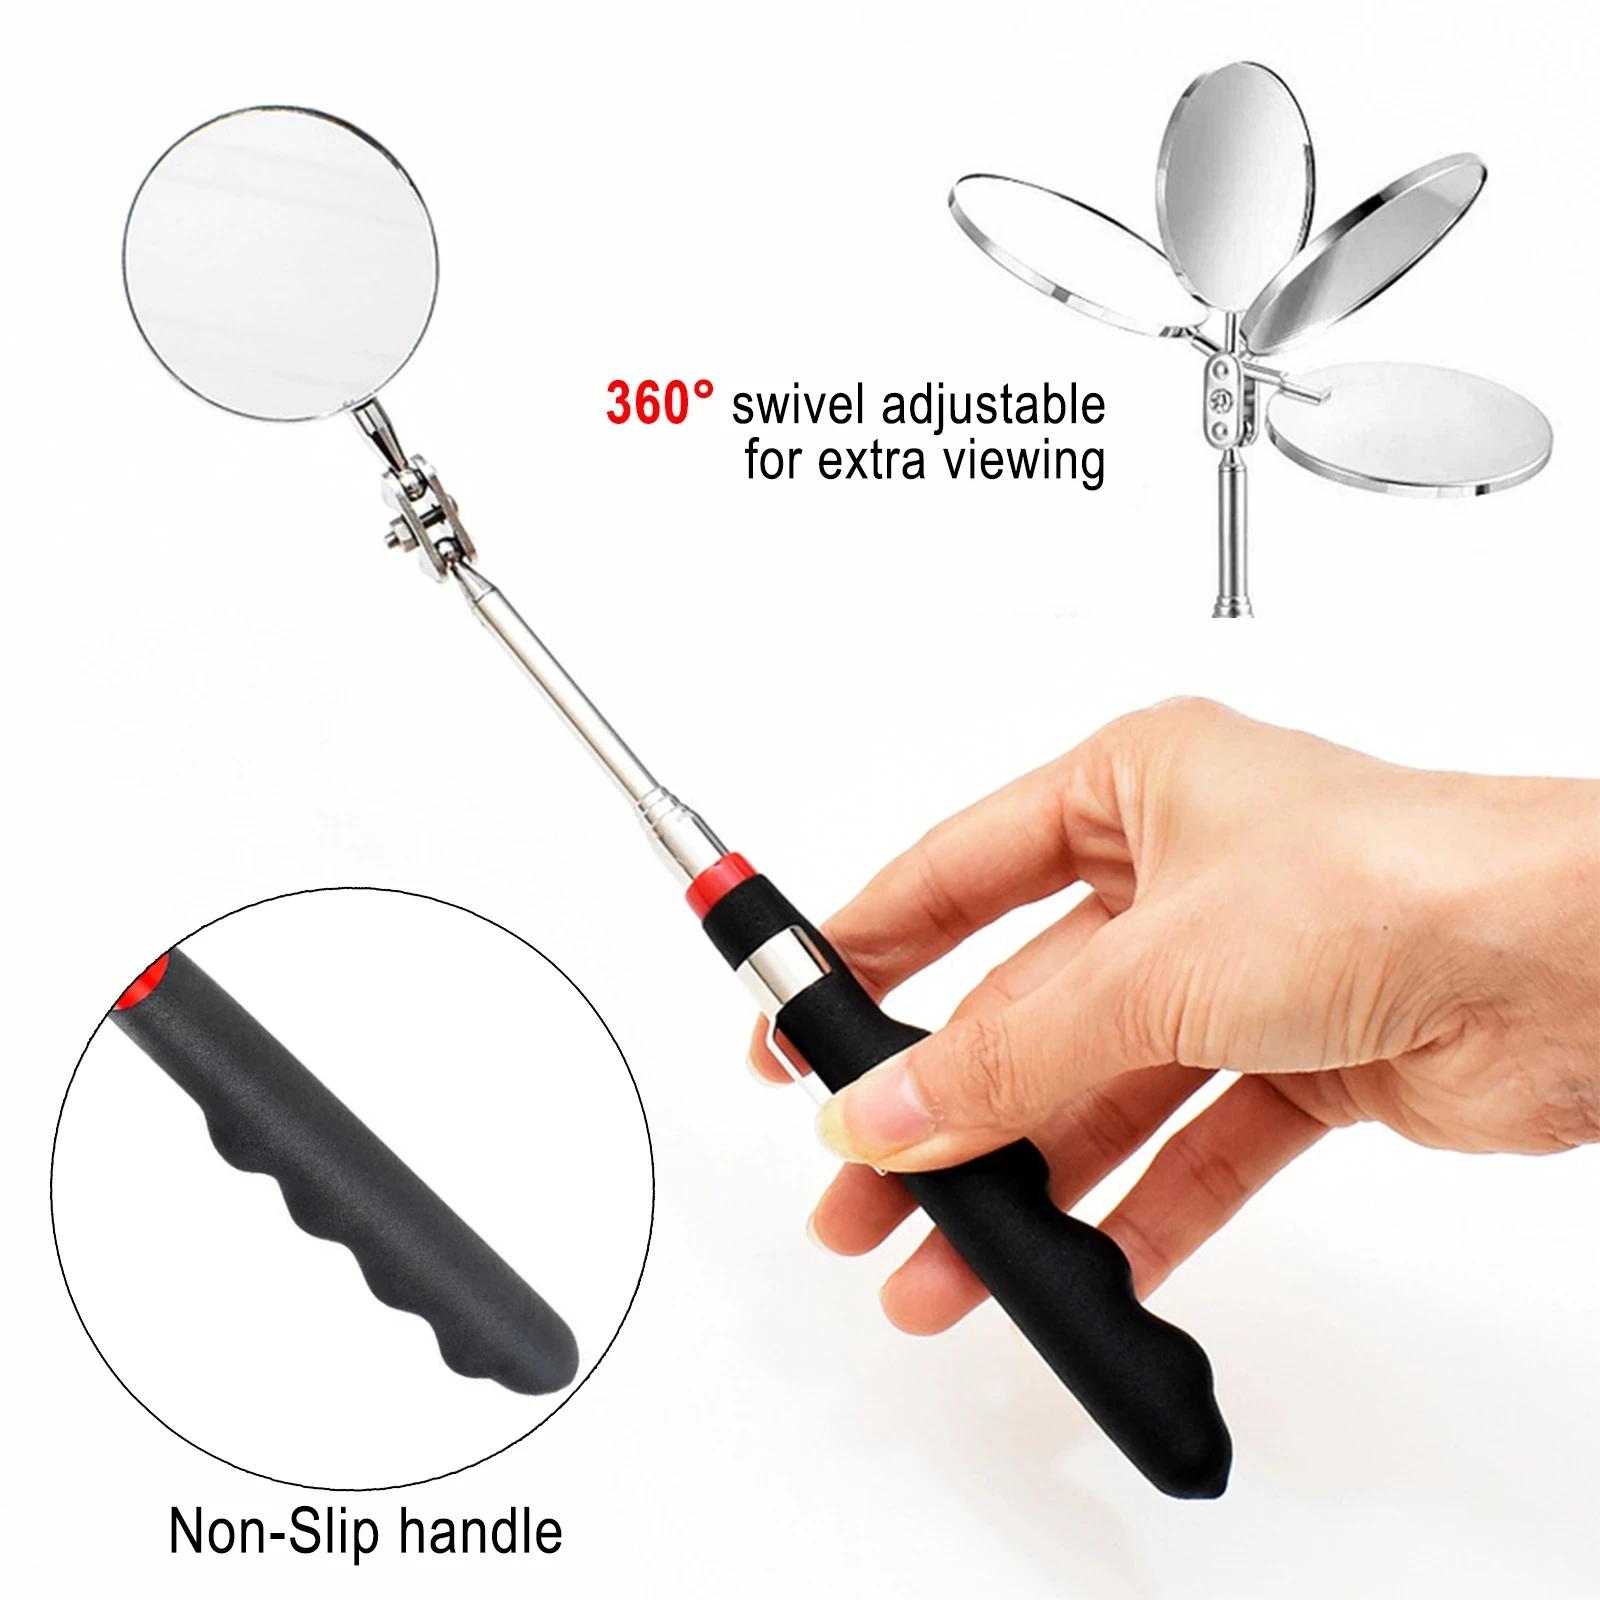 Portable Telescoping Flexible Head Inspection Mirror With LED Light Adjustable 360 Degree Swivel Viewing Auto Hand Tools